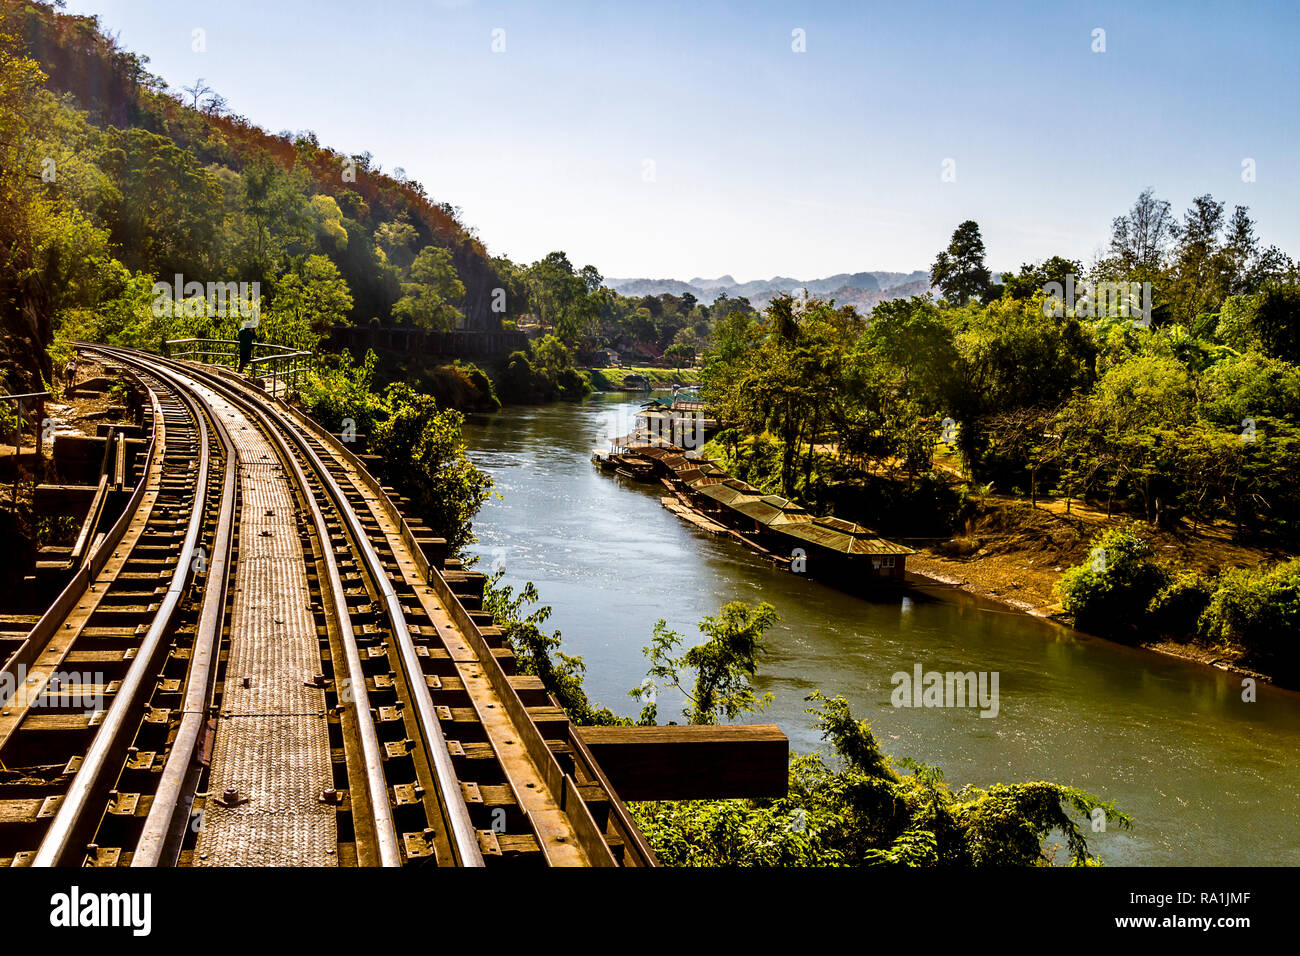 Railroad tracks running next too and above the river Kwai in Thailand. Stock Photo